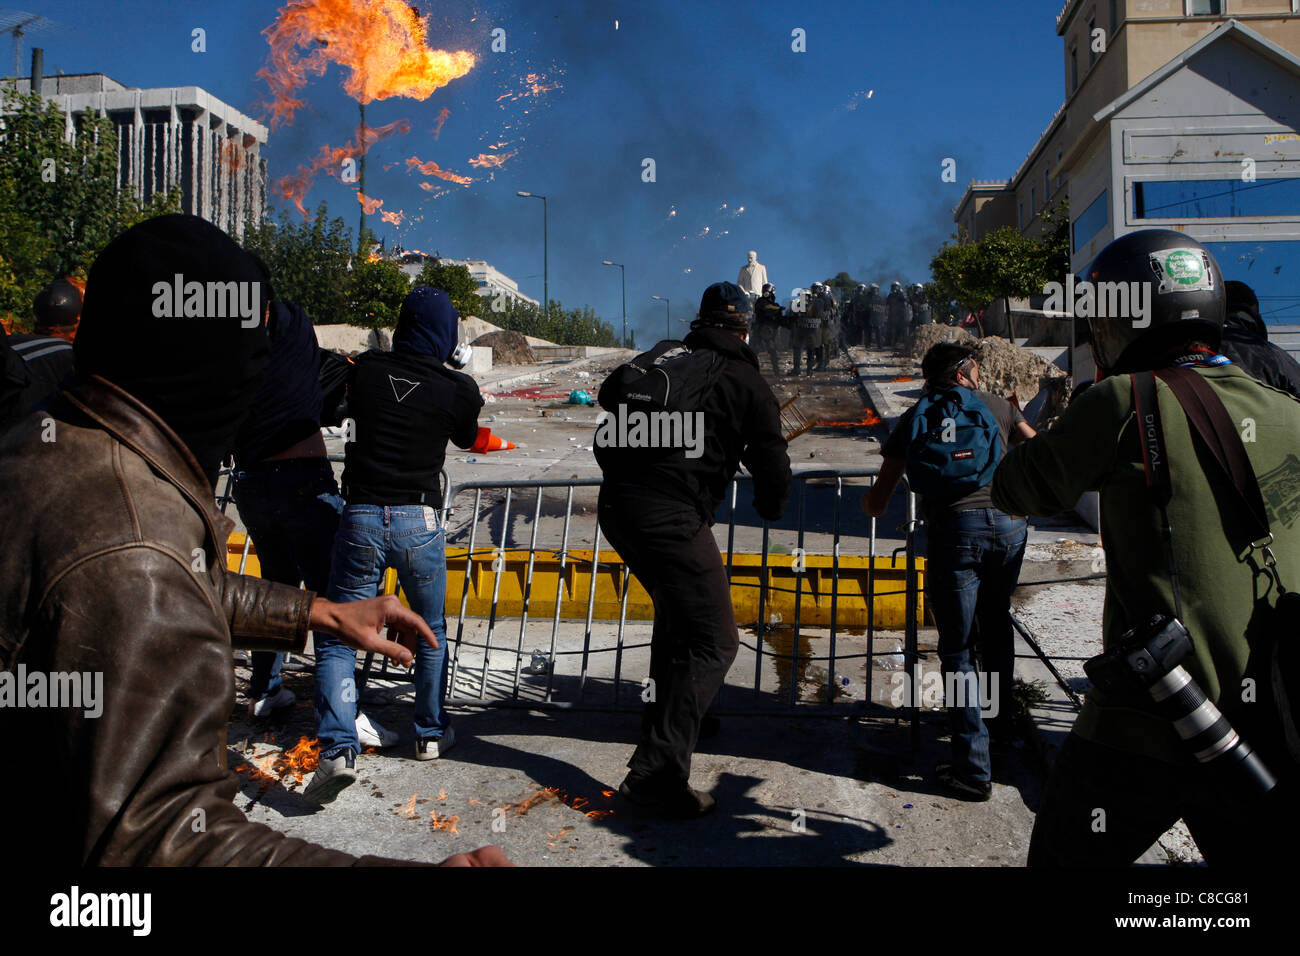 Athens Greece, 19/10/2011. Protesters clash with riot police outside the Greek Parliament, throwing fire bombs and stones. They were among thousands of people protesting in the Greek capital against proposed austerity measures. Stock Photo